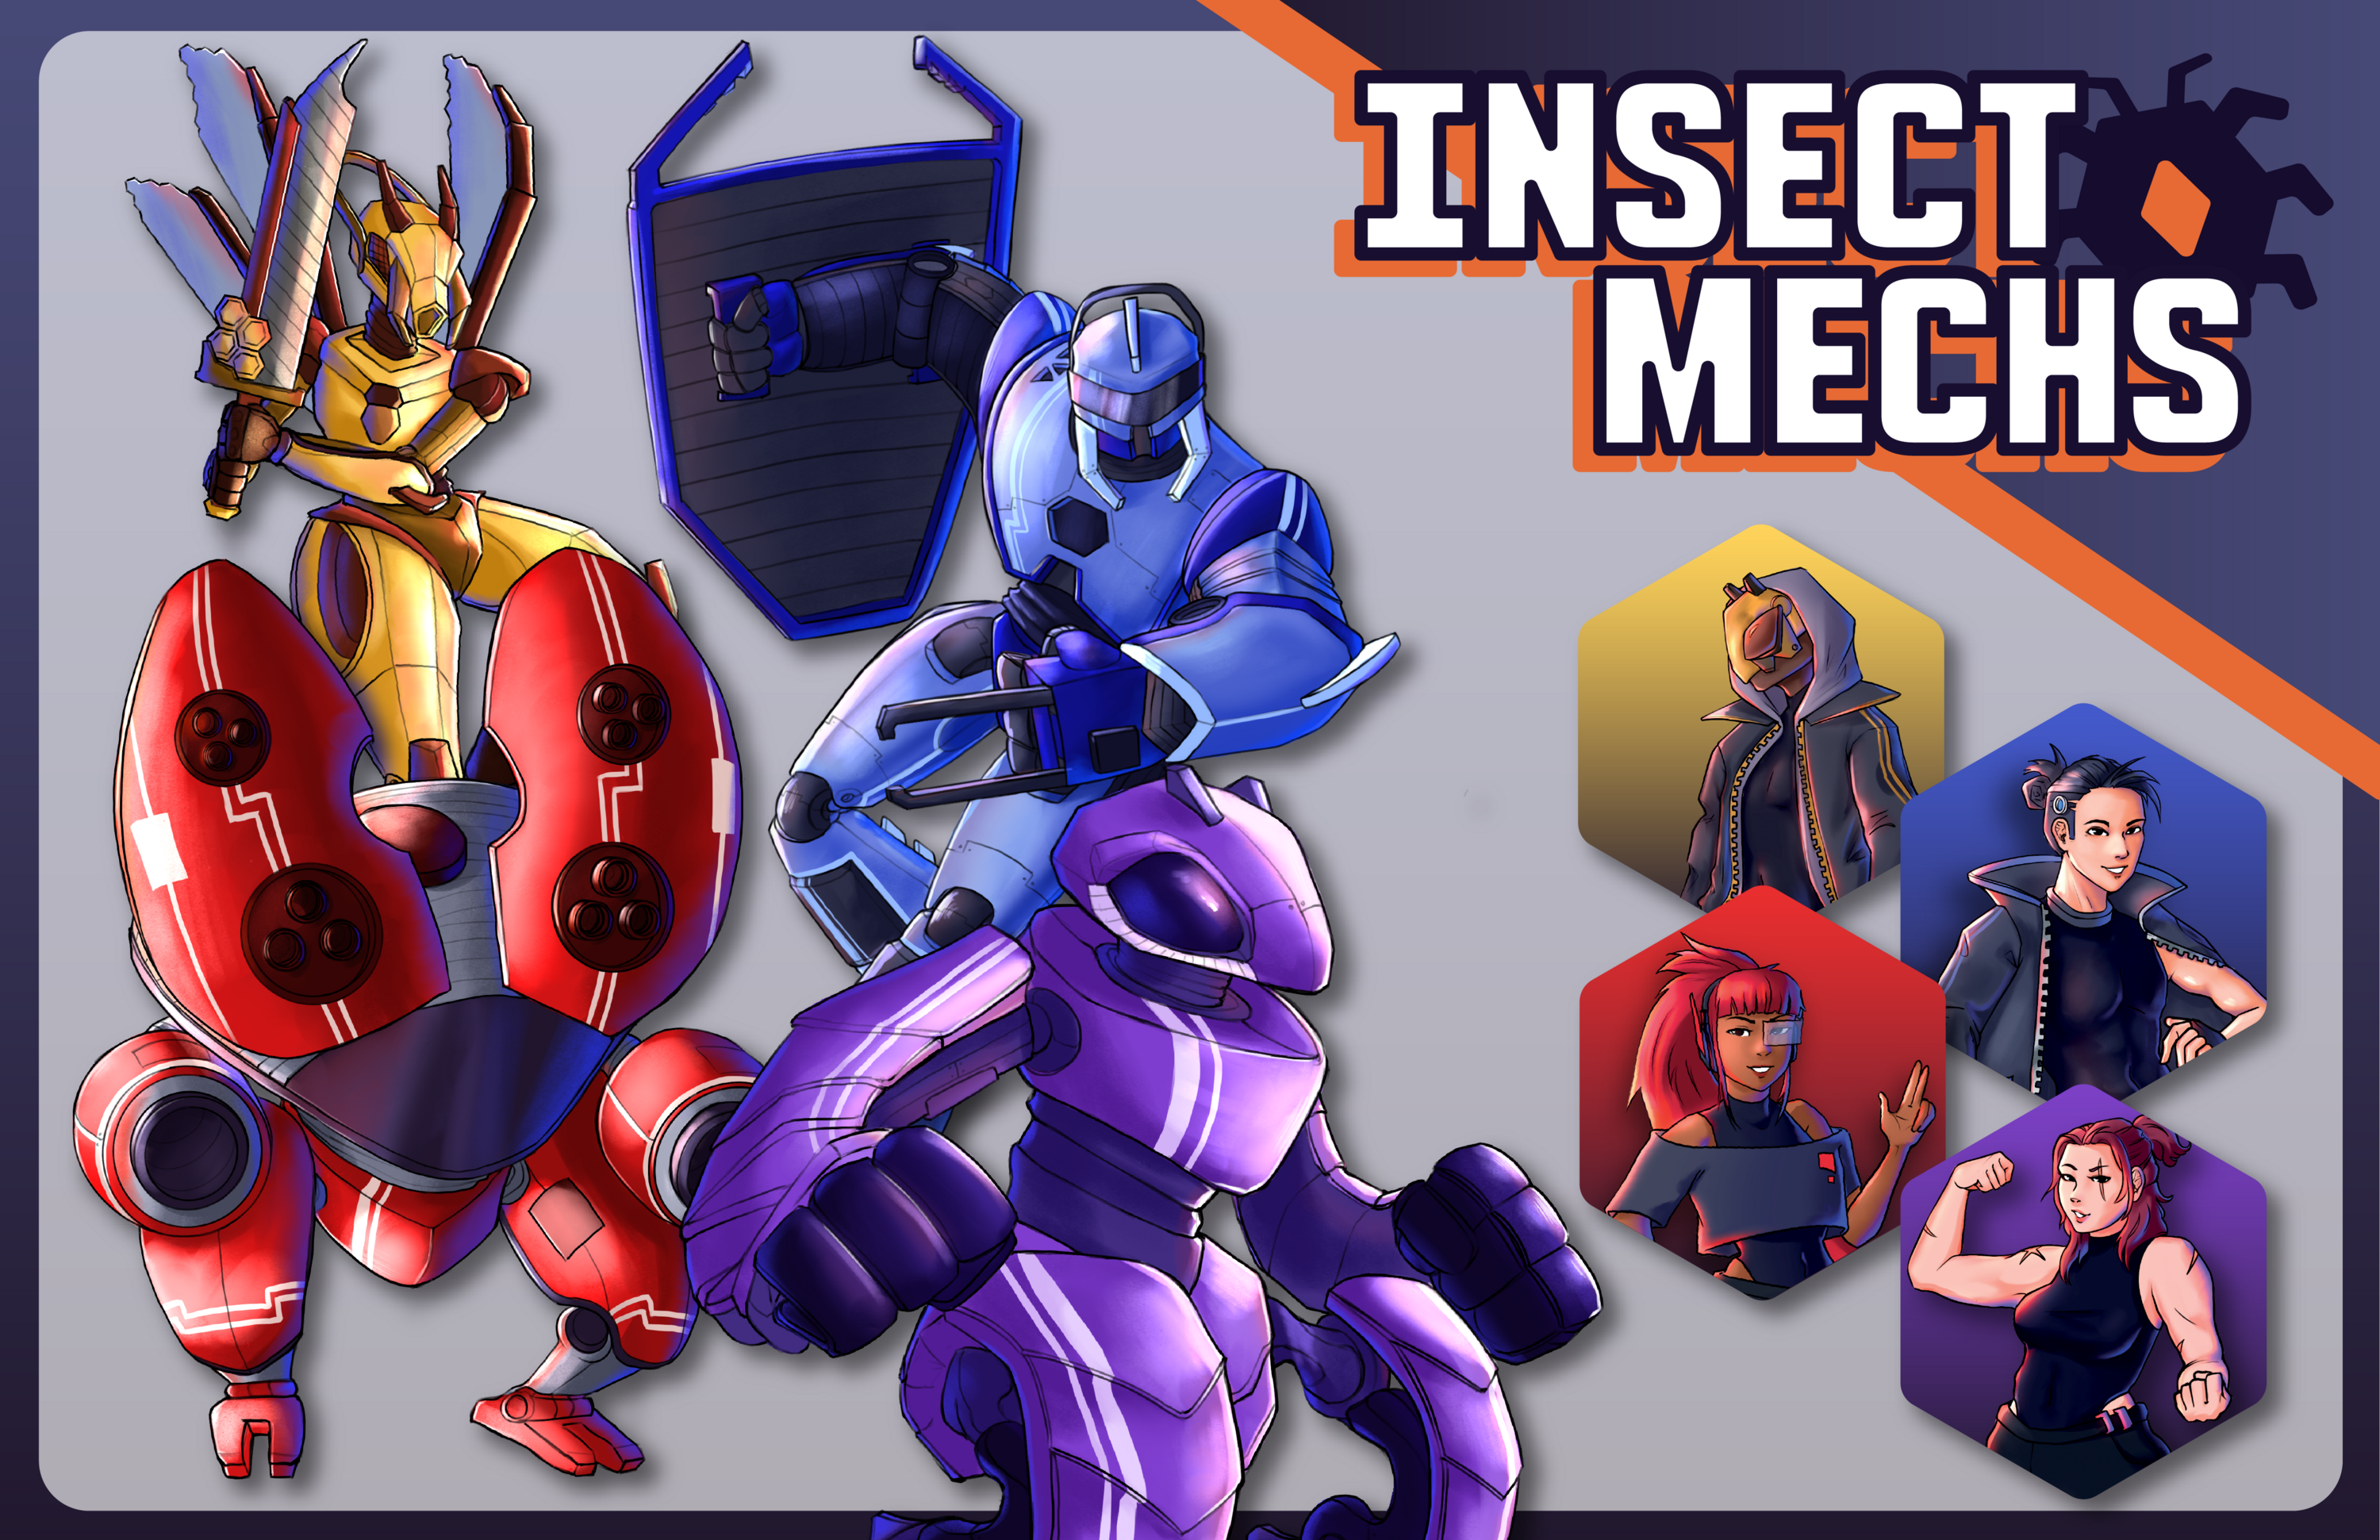 Melissa Nawas Insect Mechs